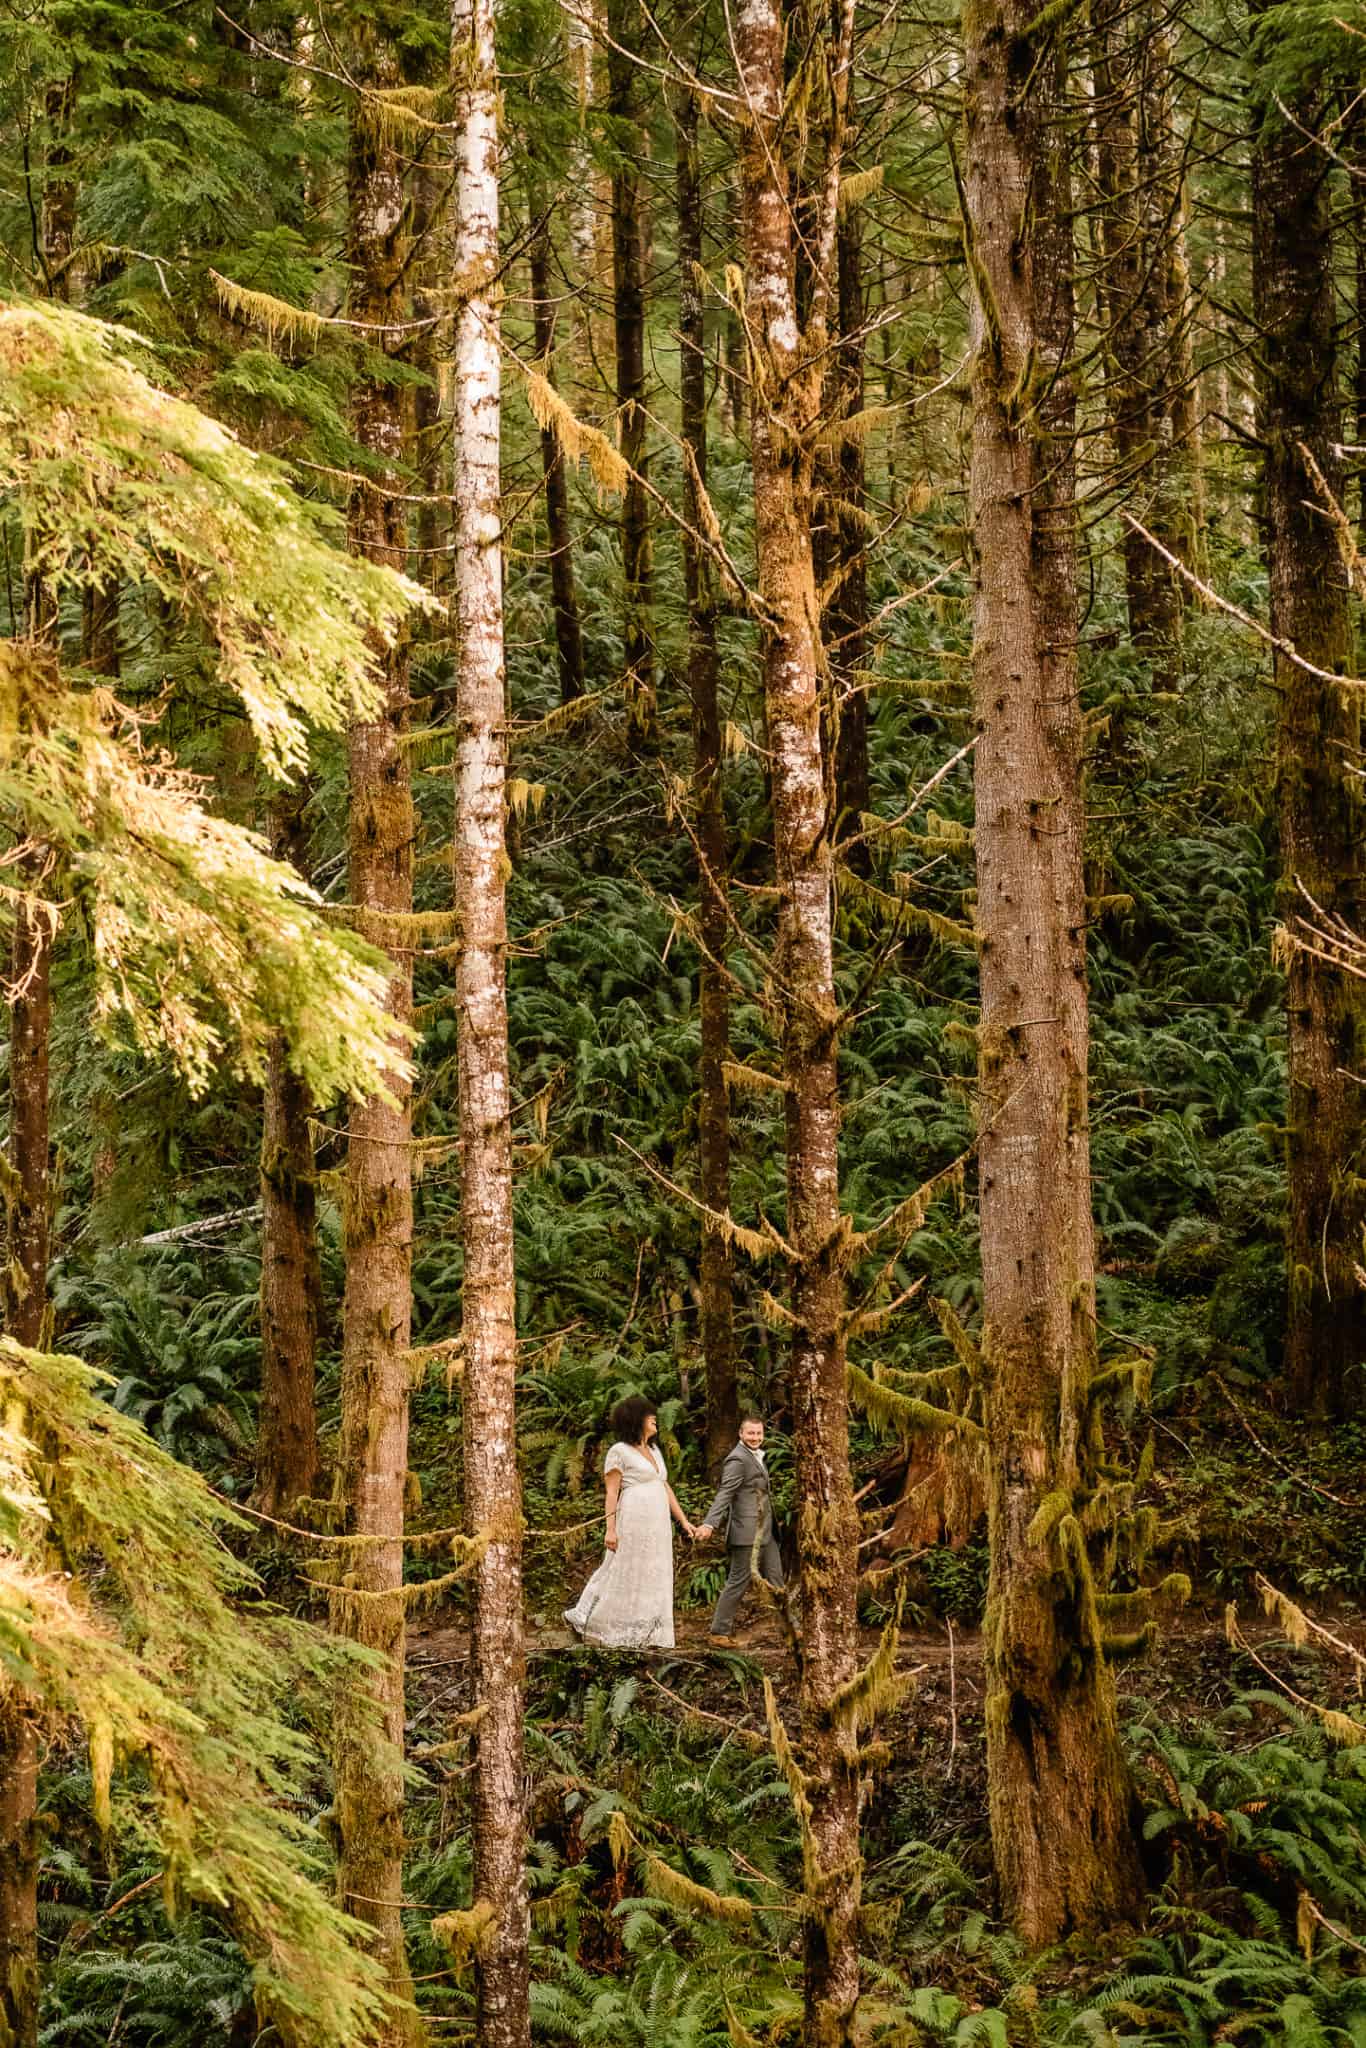 Couple walks through the forest in one of the best places to elope in Oregon surrounded by trees and greenery